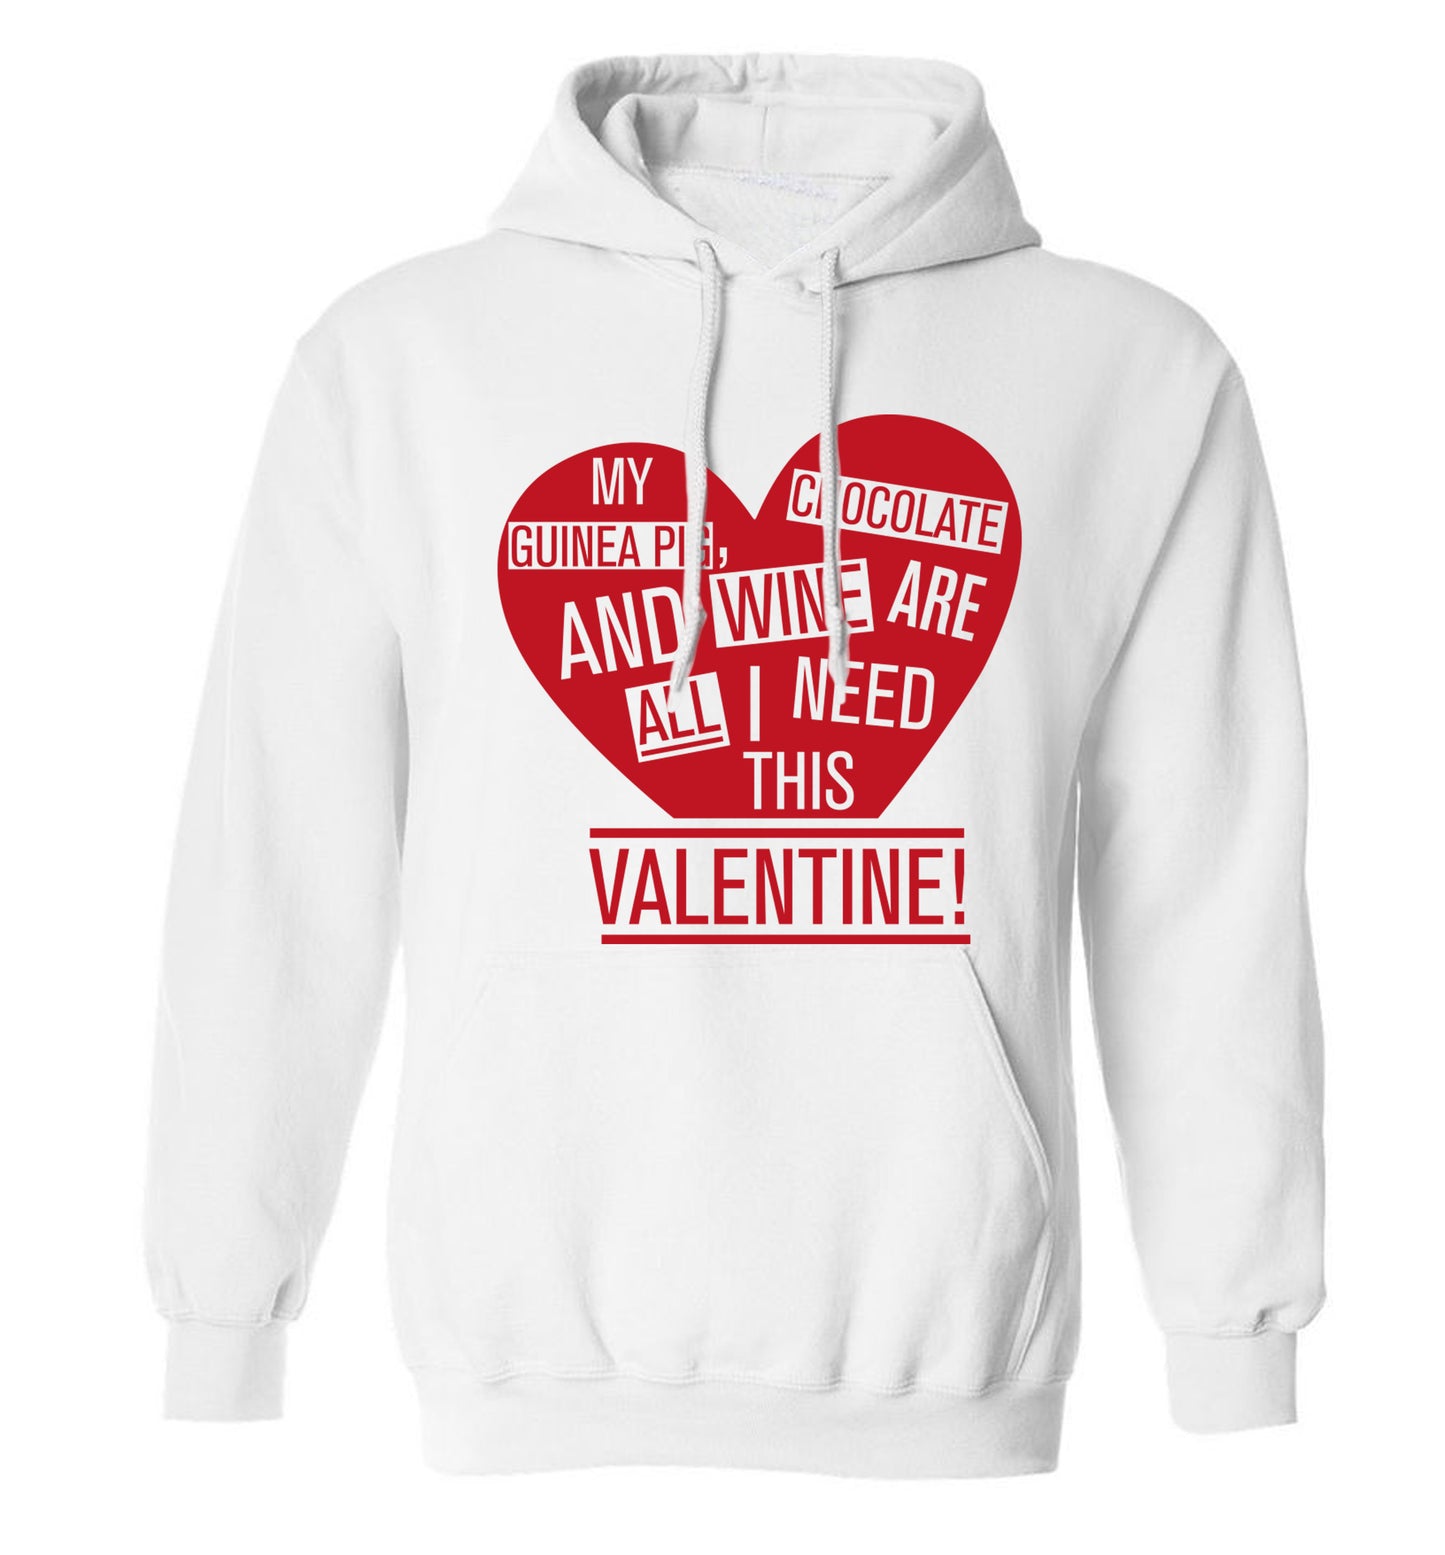 My guinea pig, chocolate and wine are all I need this valentine! adults unisex white hoodie 2XL